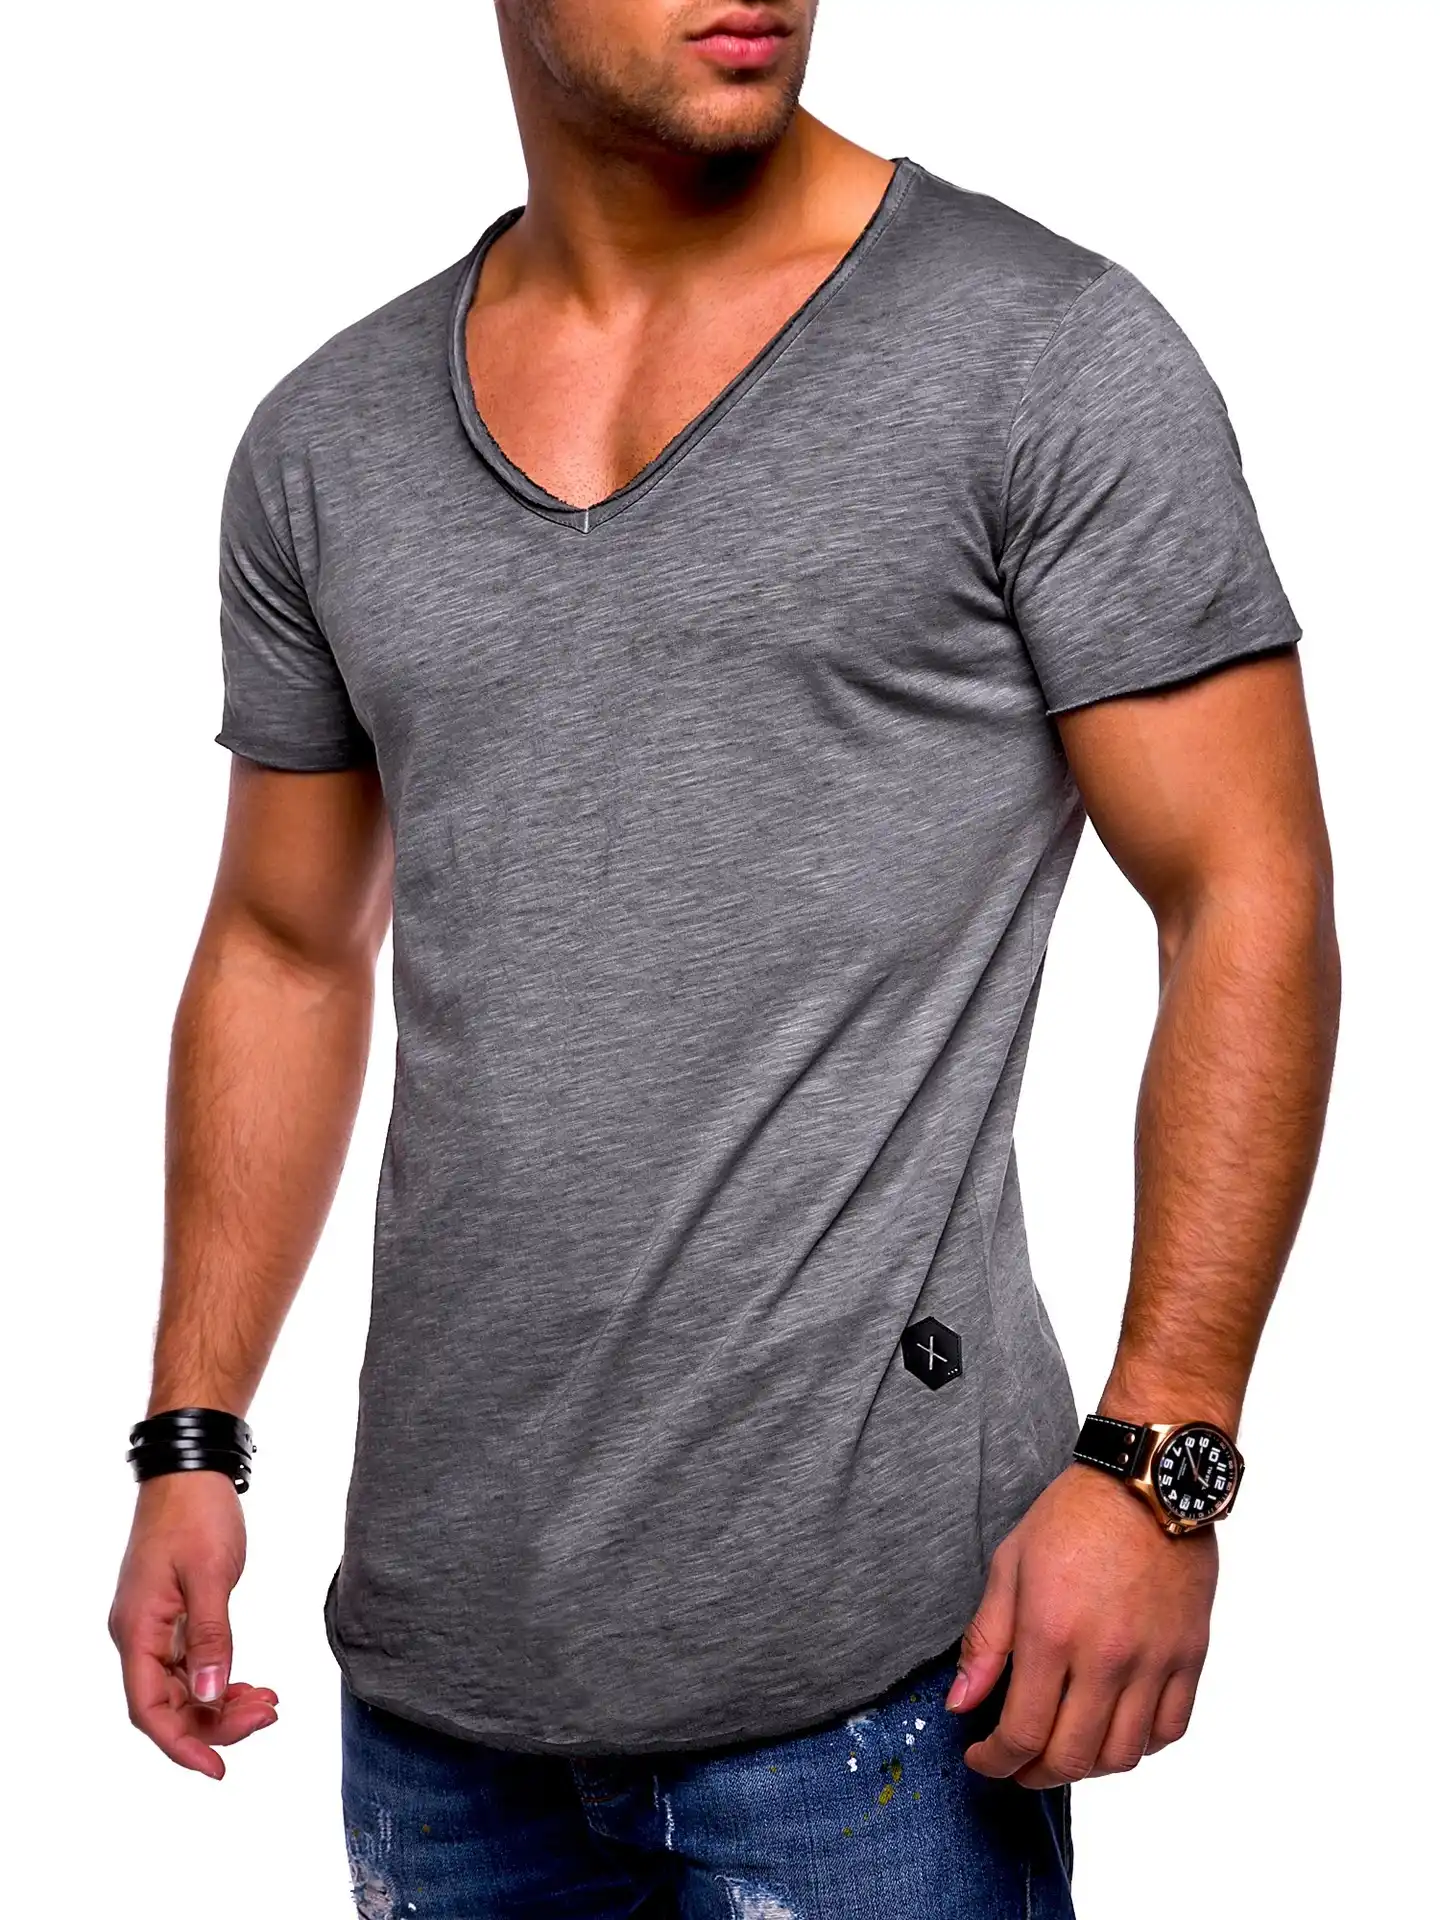 Find Discount Fashion Outfits for Men Online Shopping